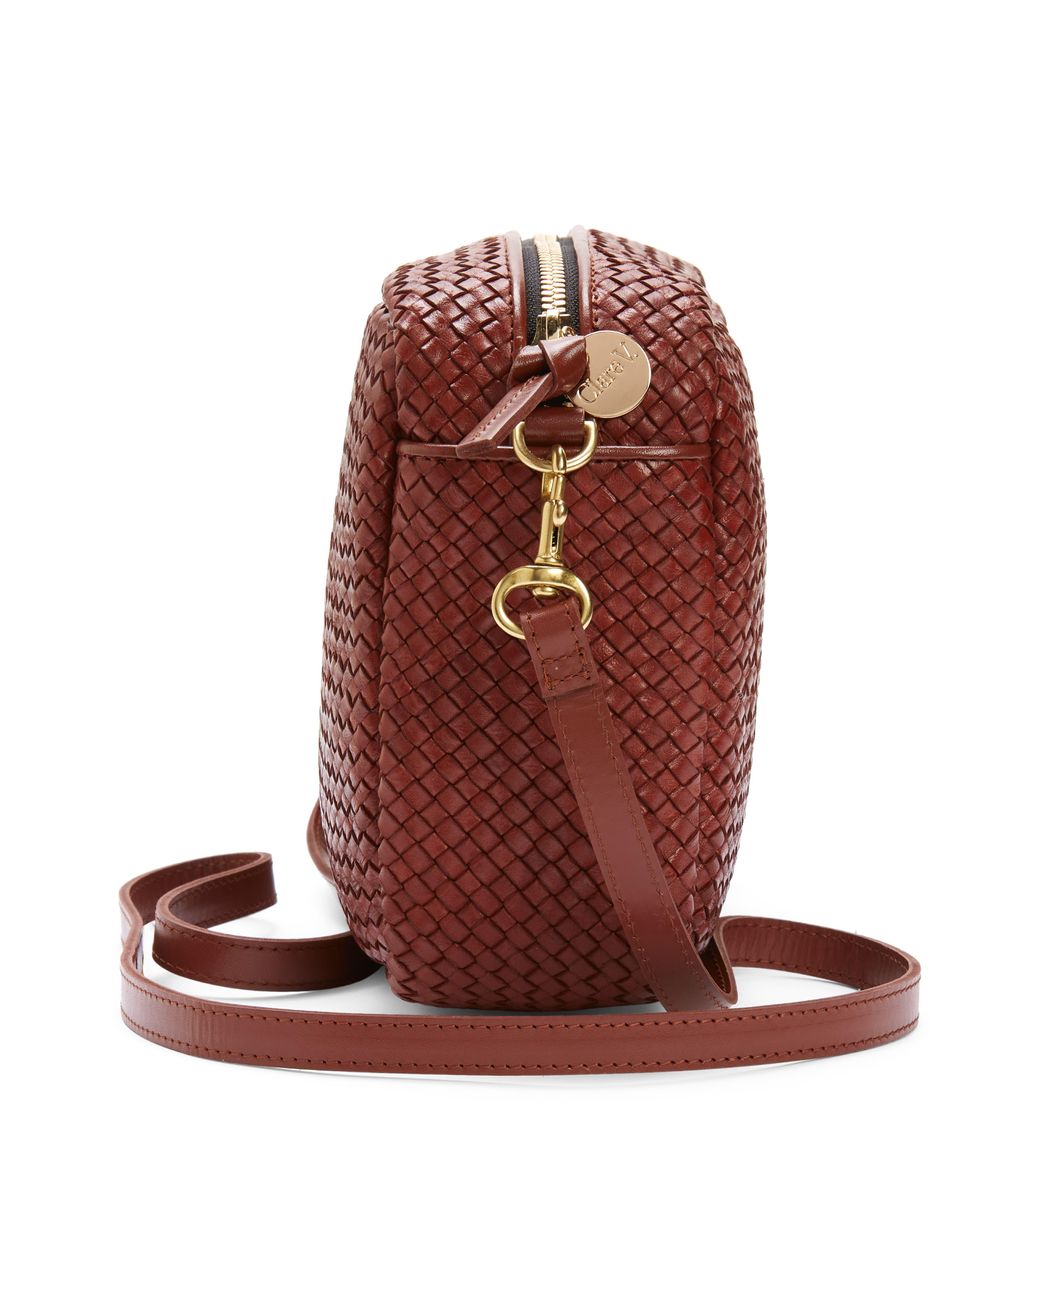 Clare V. Marisol Woven Crossbody Bag  Anthropologie Taiwan - Women's  Clothing, Accessories & Home